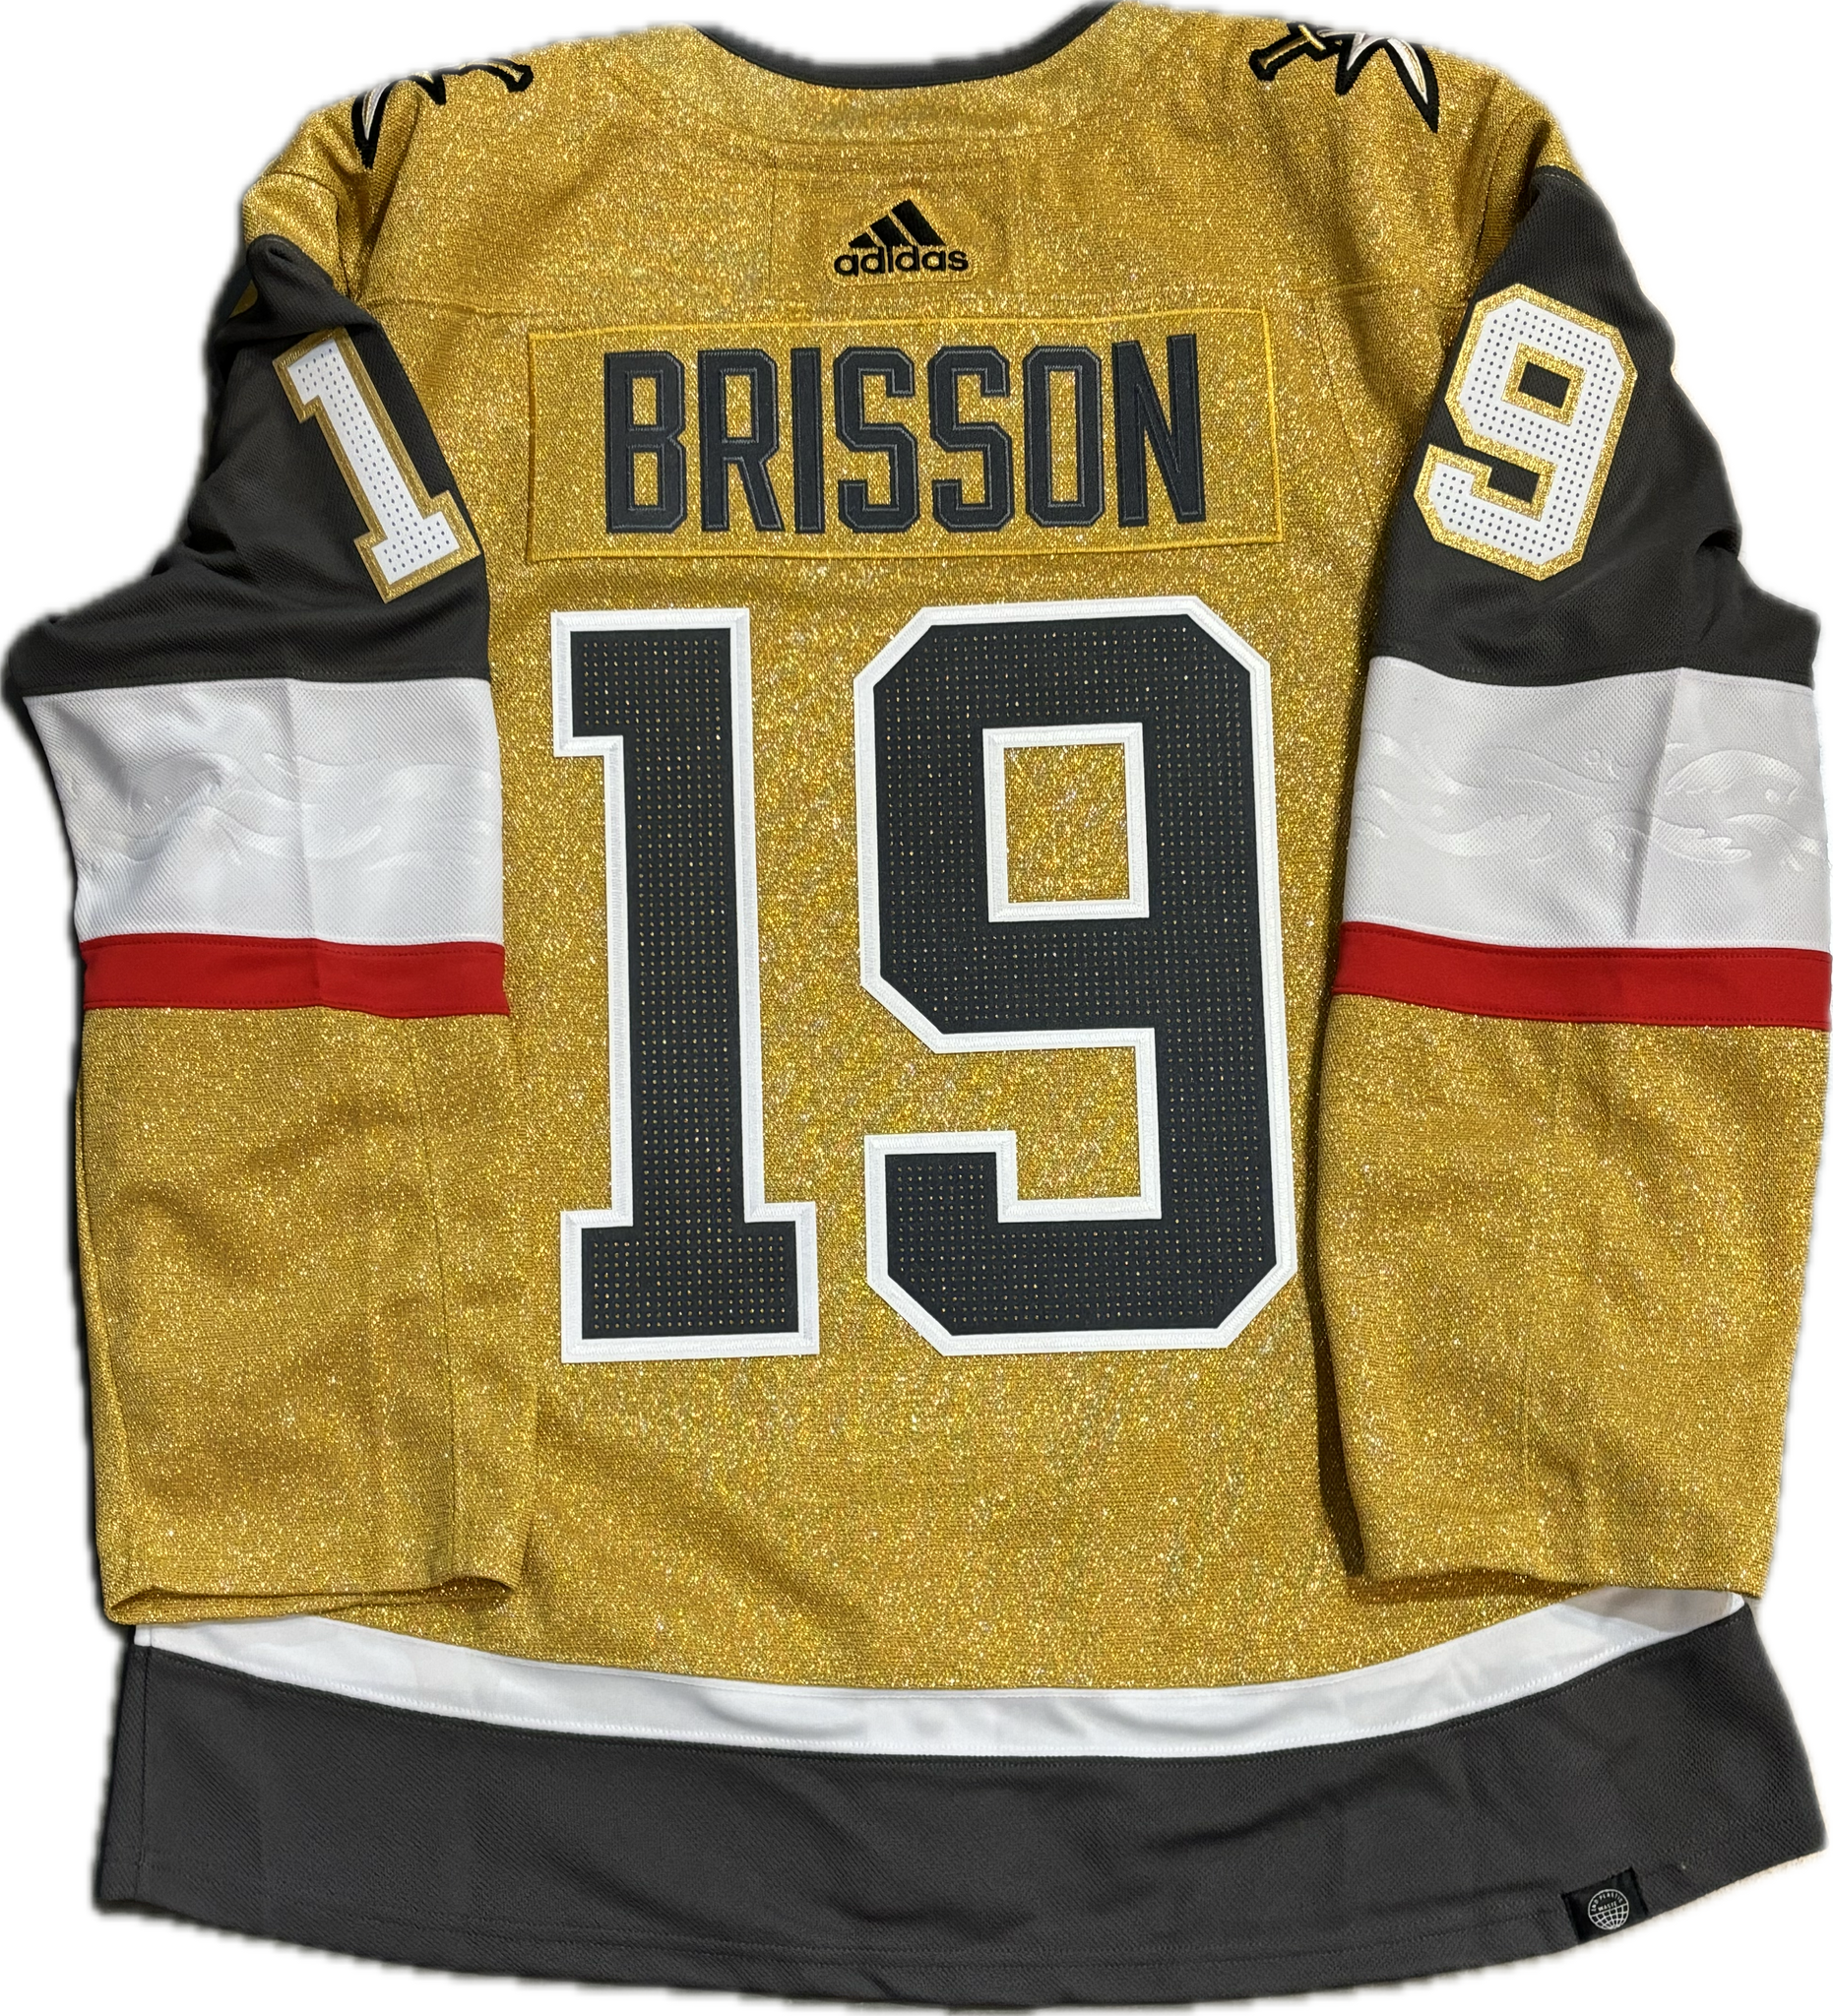 Vegas Golden Knights Brisson Authentic Adidas Jersey Gold Home